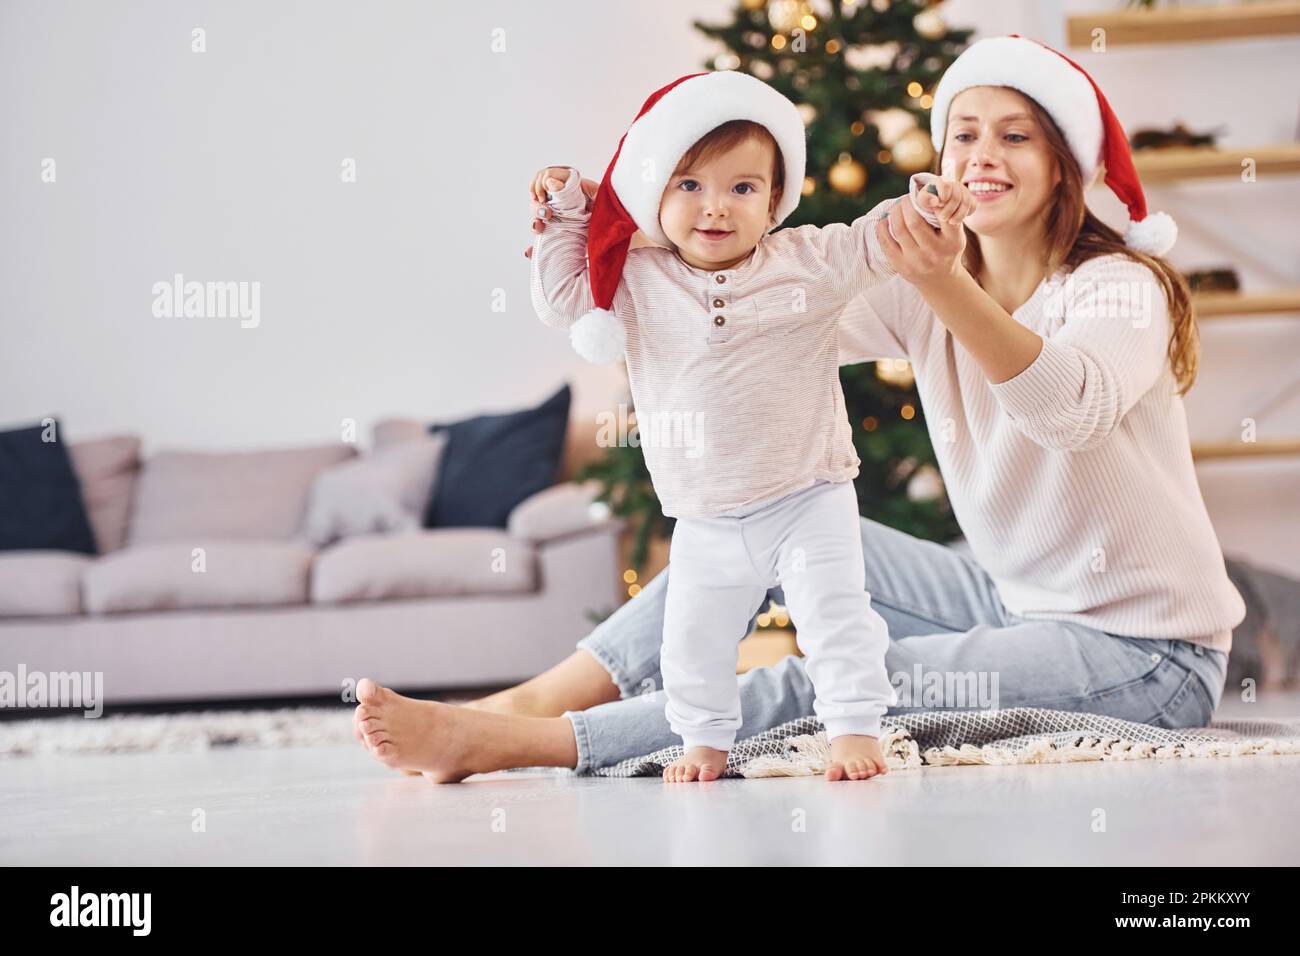 In Santa hats. Mother with her little daughter is indoors at home together. Stock Photo